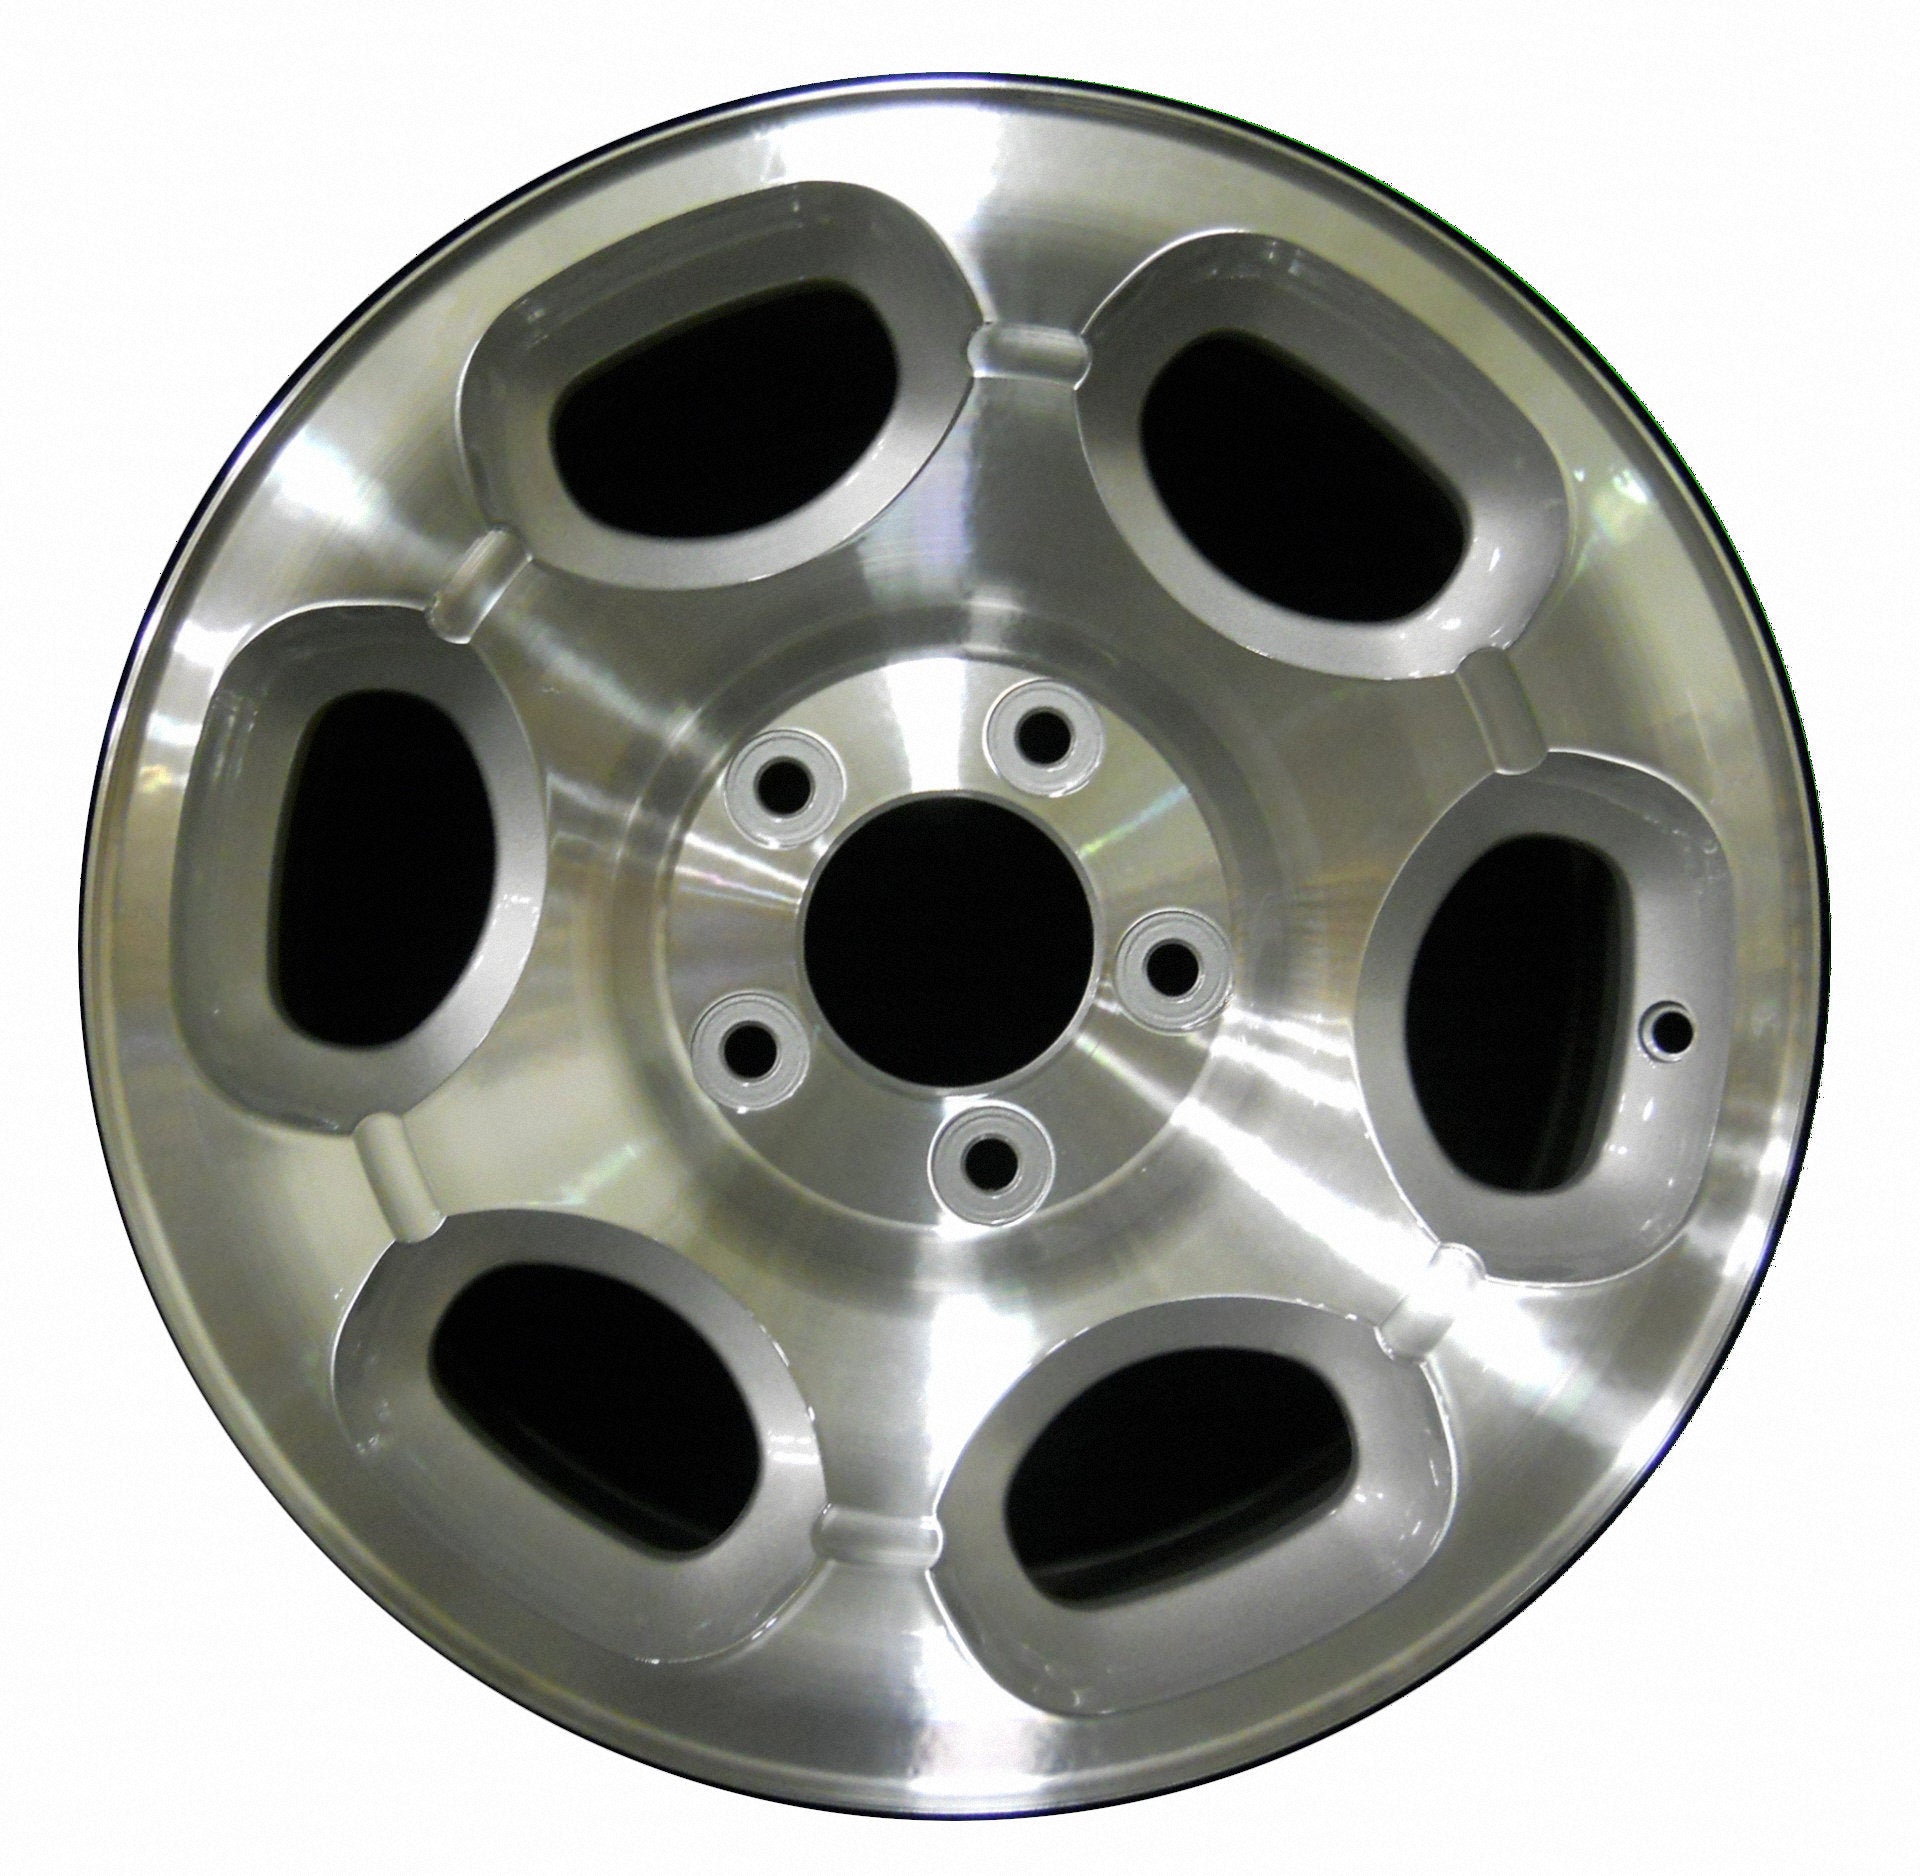 Lincoln Navigator  2000, 2001, 2002 Factory OEM Car Wheel Size 17x7.5 Alloy WAO.3389.PS02.MA